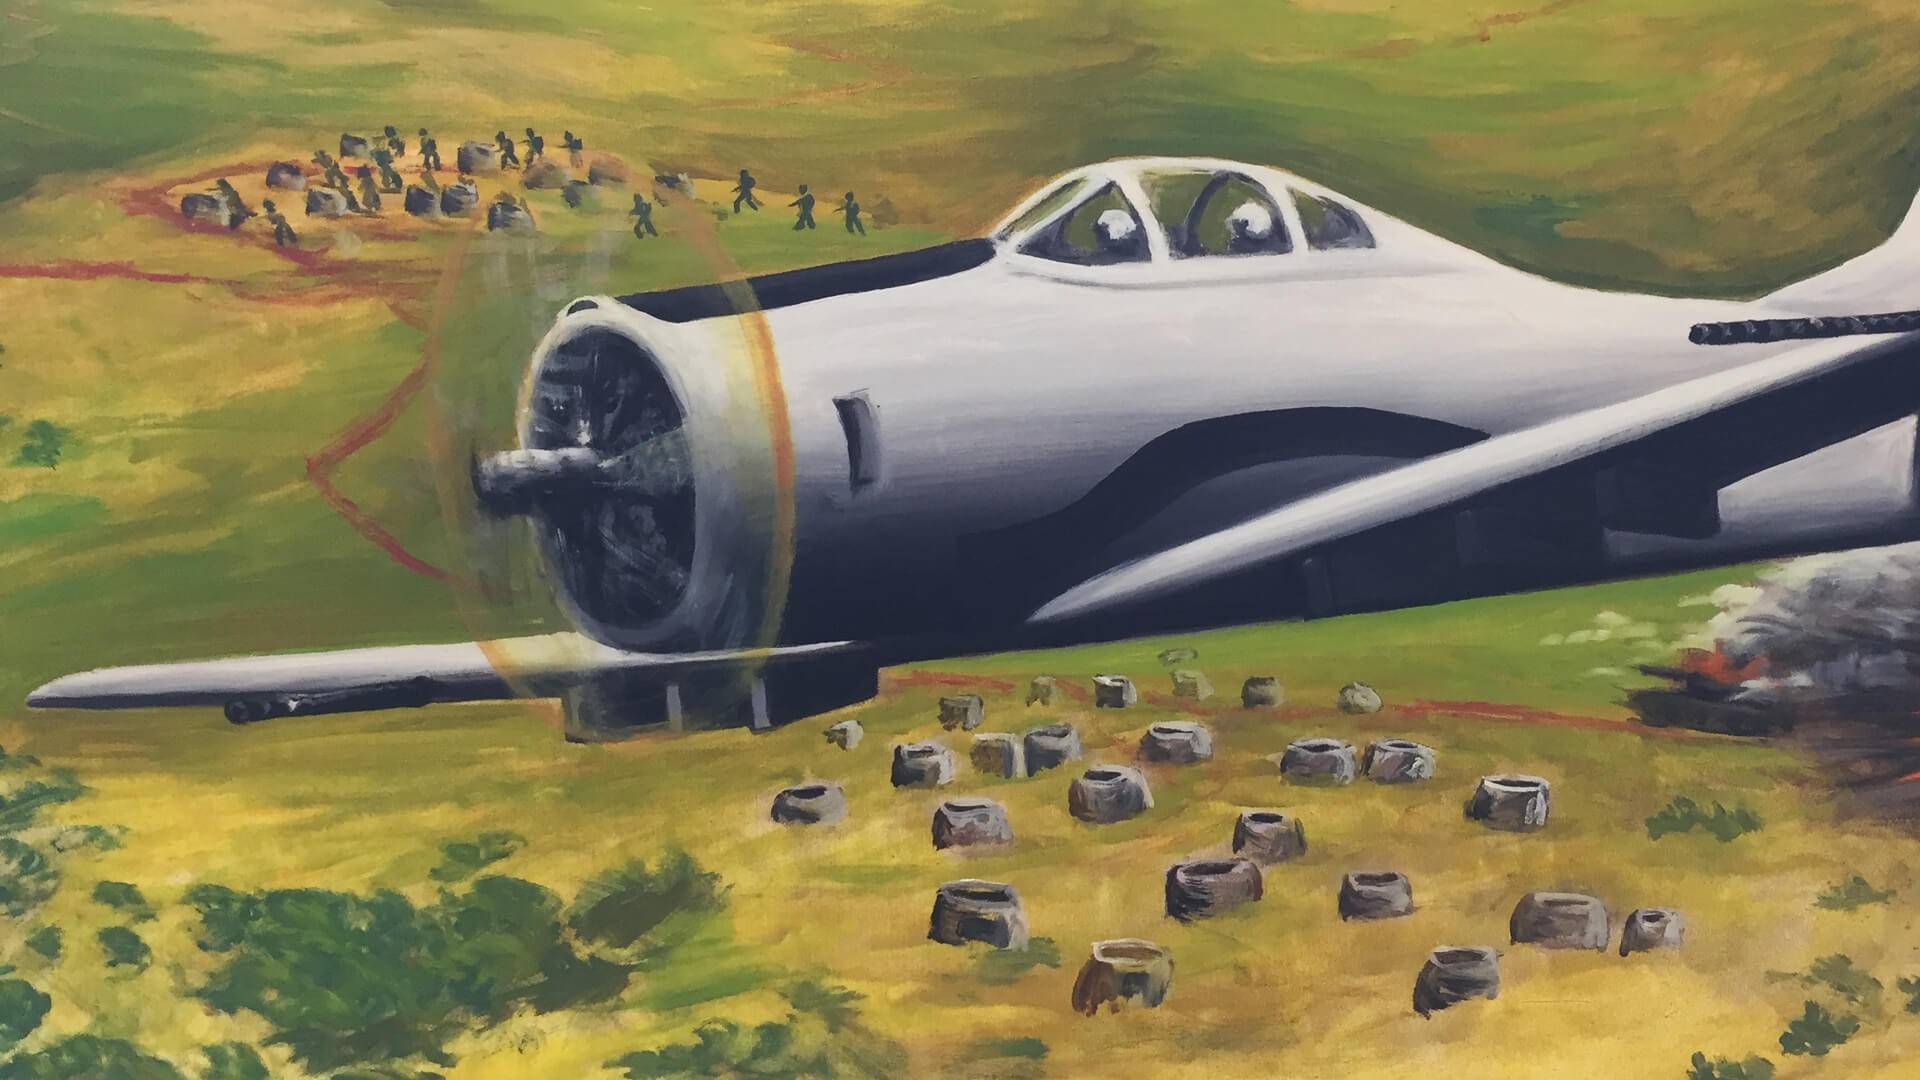 Painting of a T-28 bomber plane